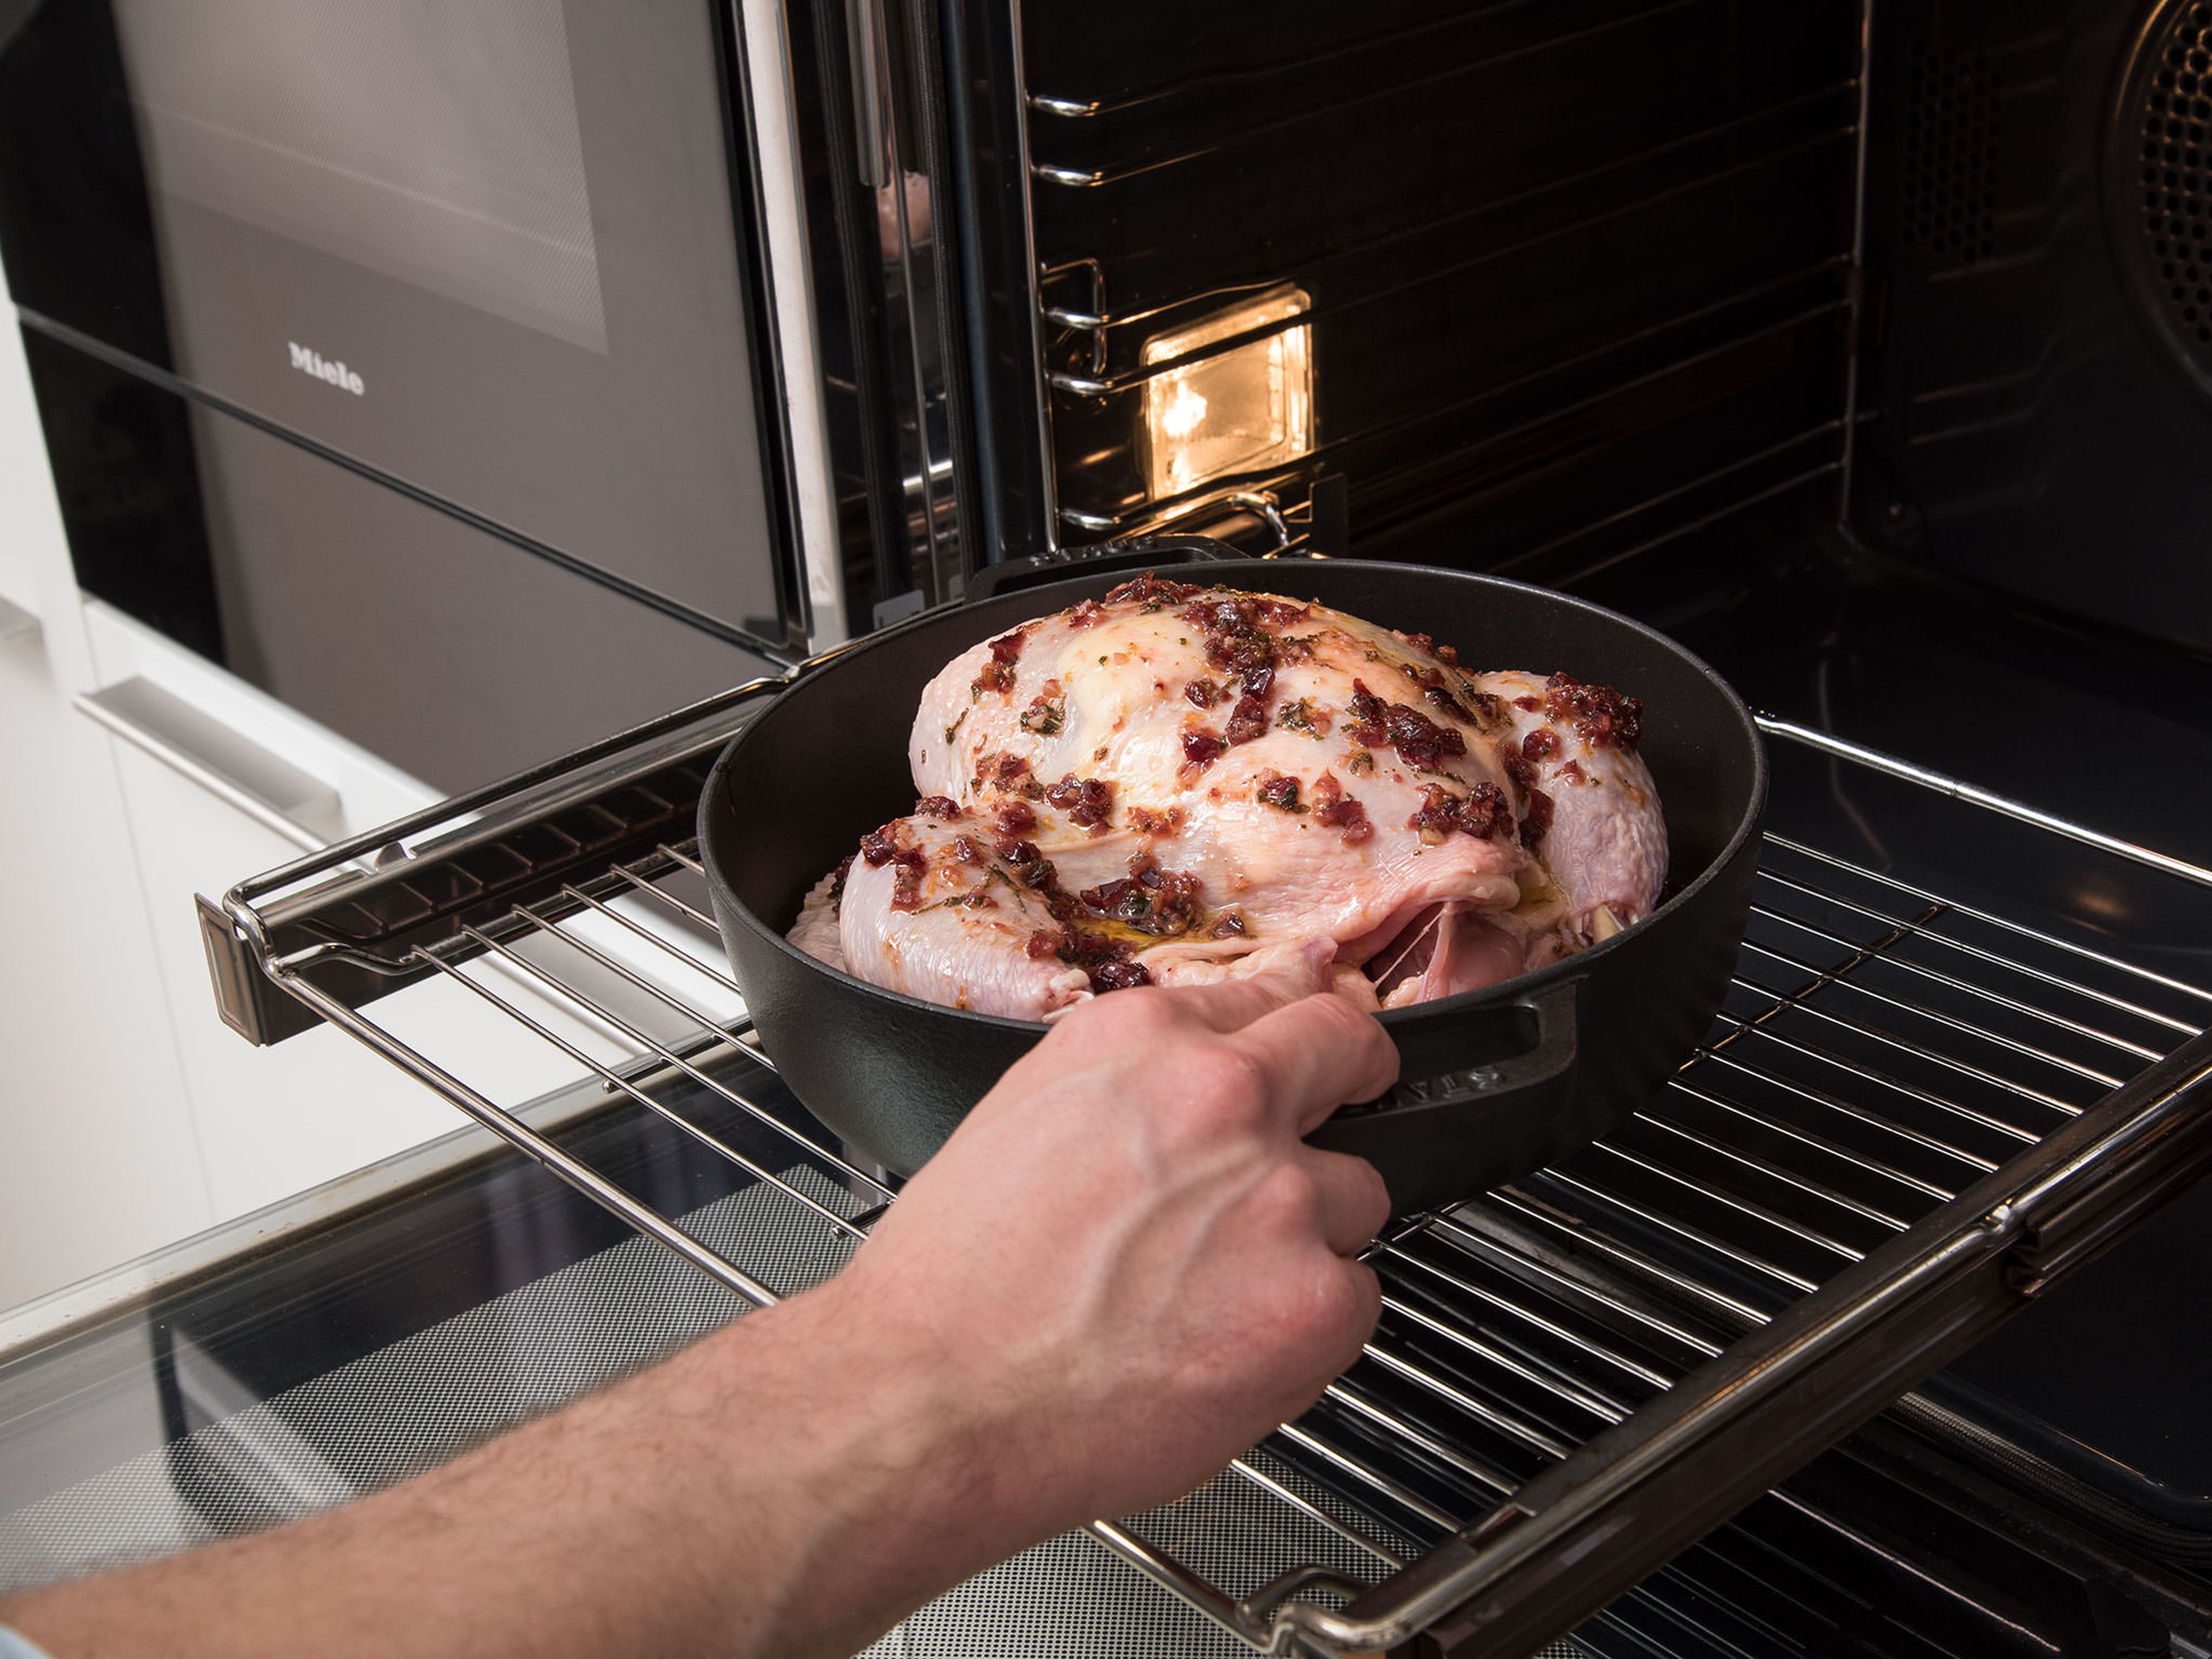 Spread some butter underneath the chicken skin, between the breast and the skin. Transfer chicken to the roasting pan and brush blood orange sauce over it with a pastry brush. Bake at 180°C/350°F for approx. 60 min., basting with blood orange sauce approx. every 20 min.